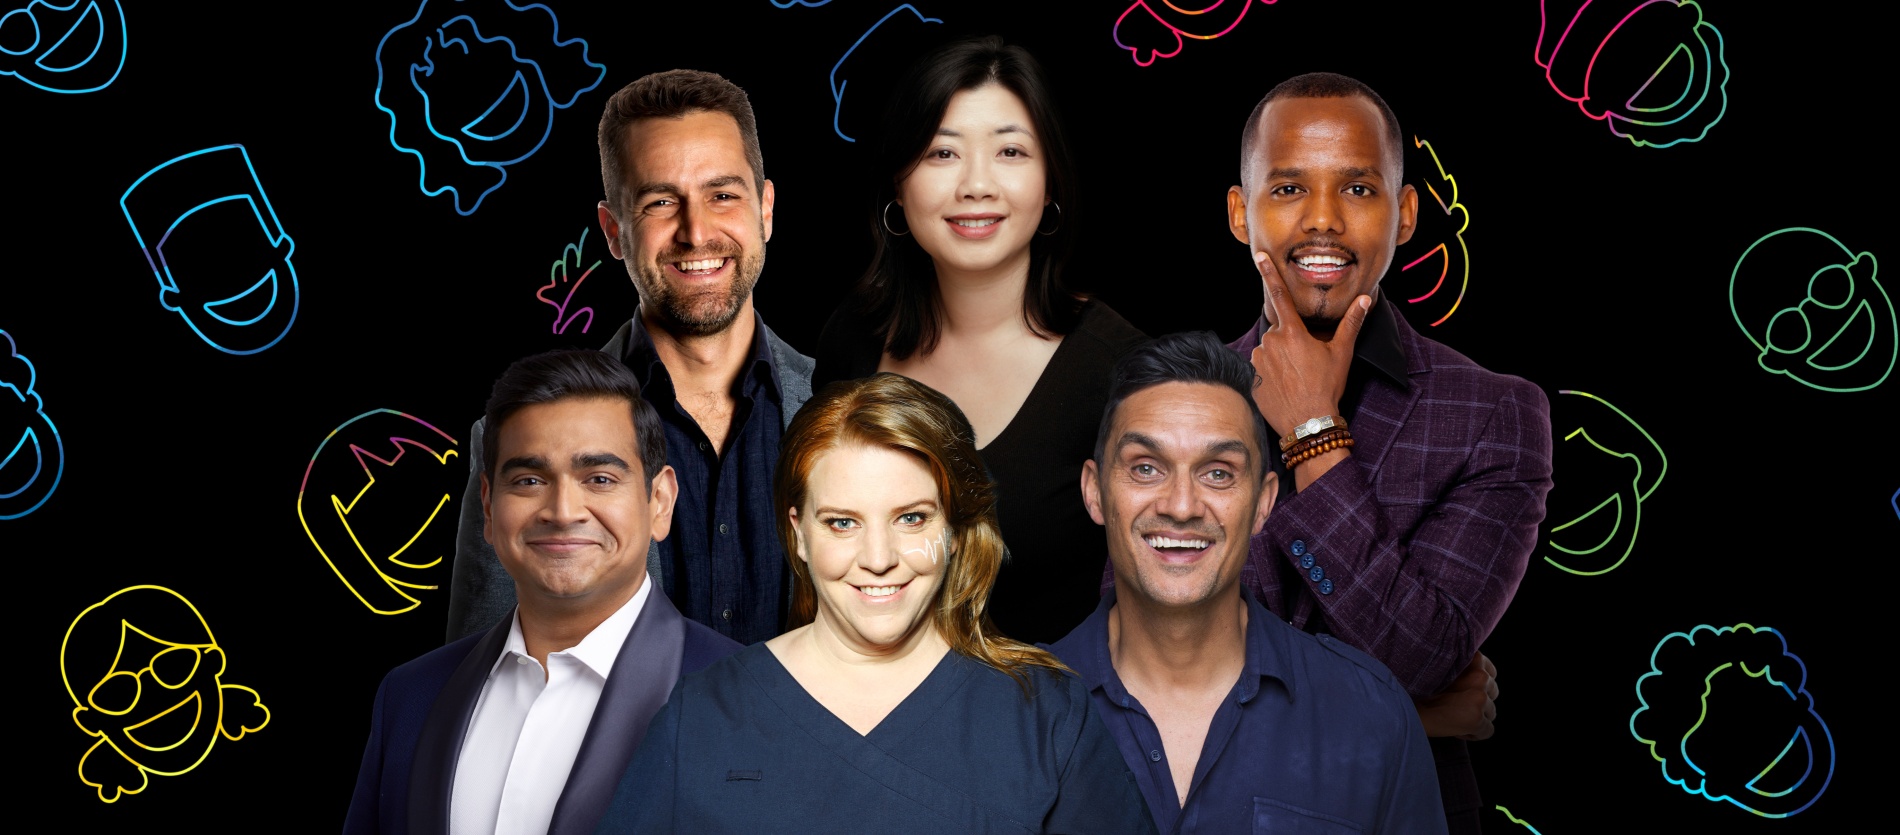 Promotional Image for Multicultural Comedy Gala at KPAC in September 2022